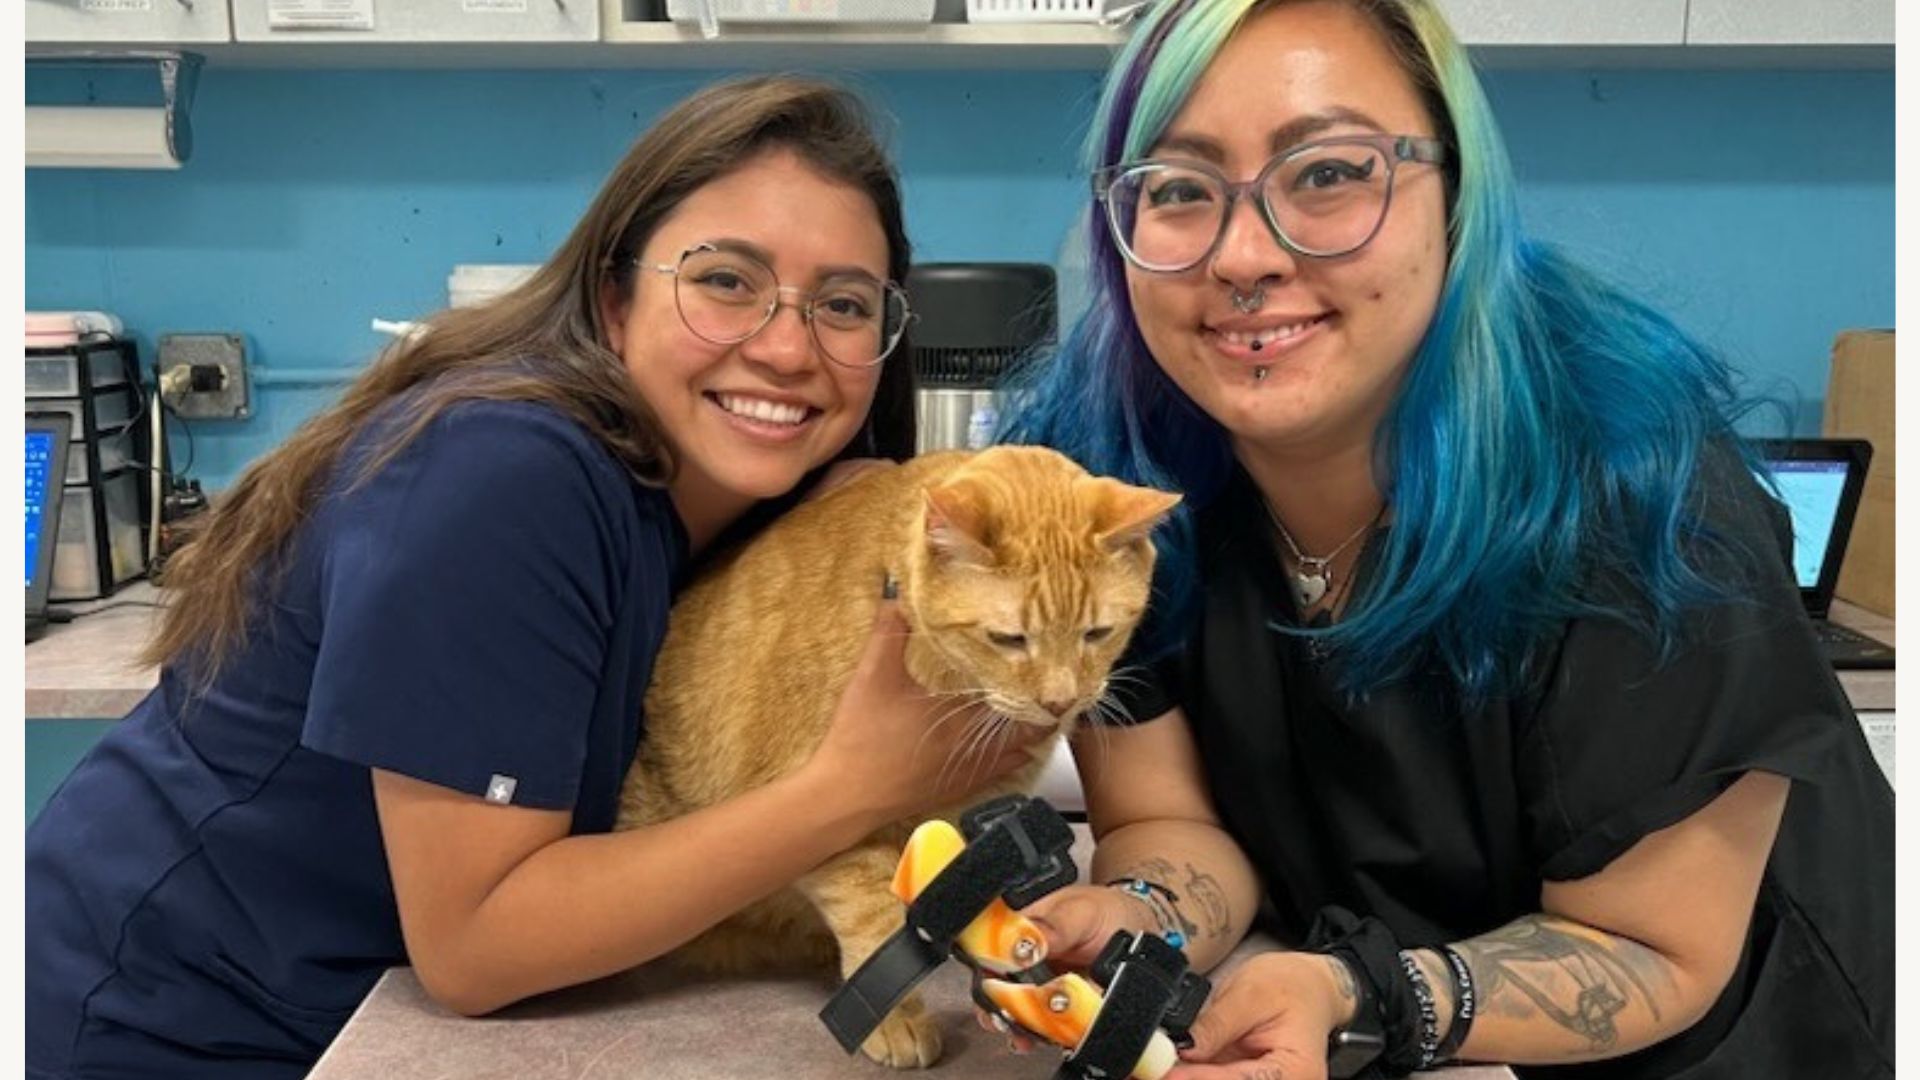 Two women hold an orange cat with leg braces on a medical exam table